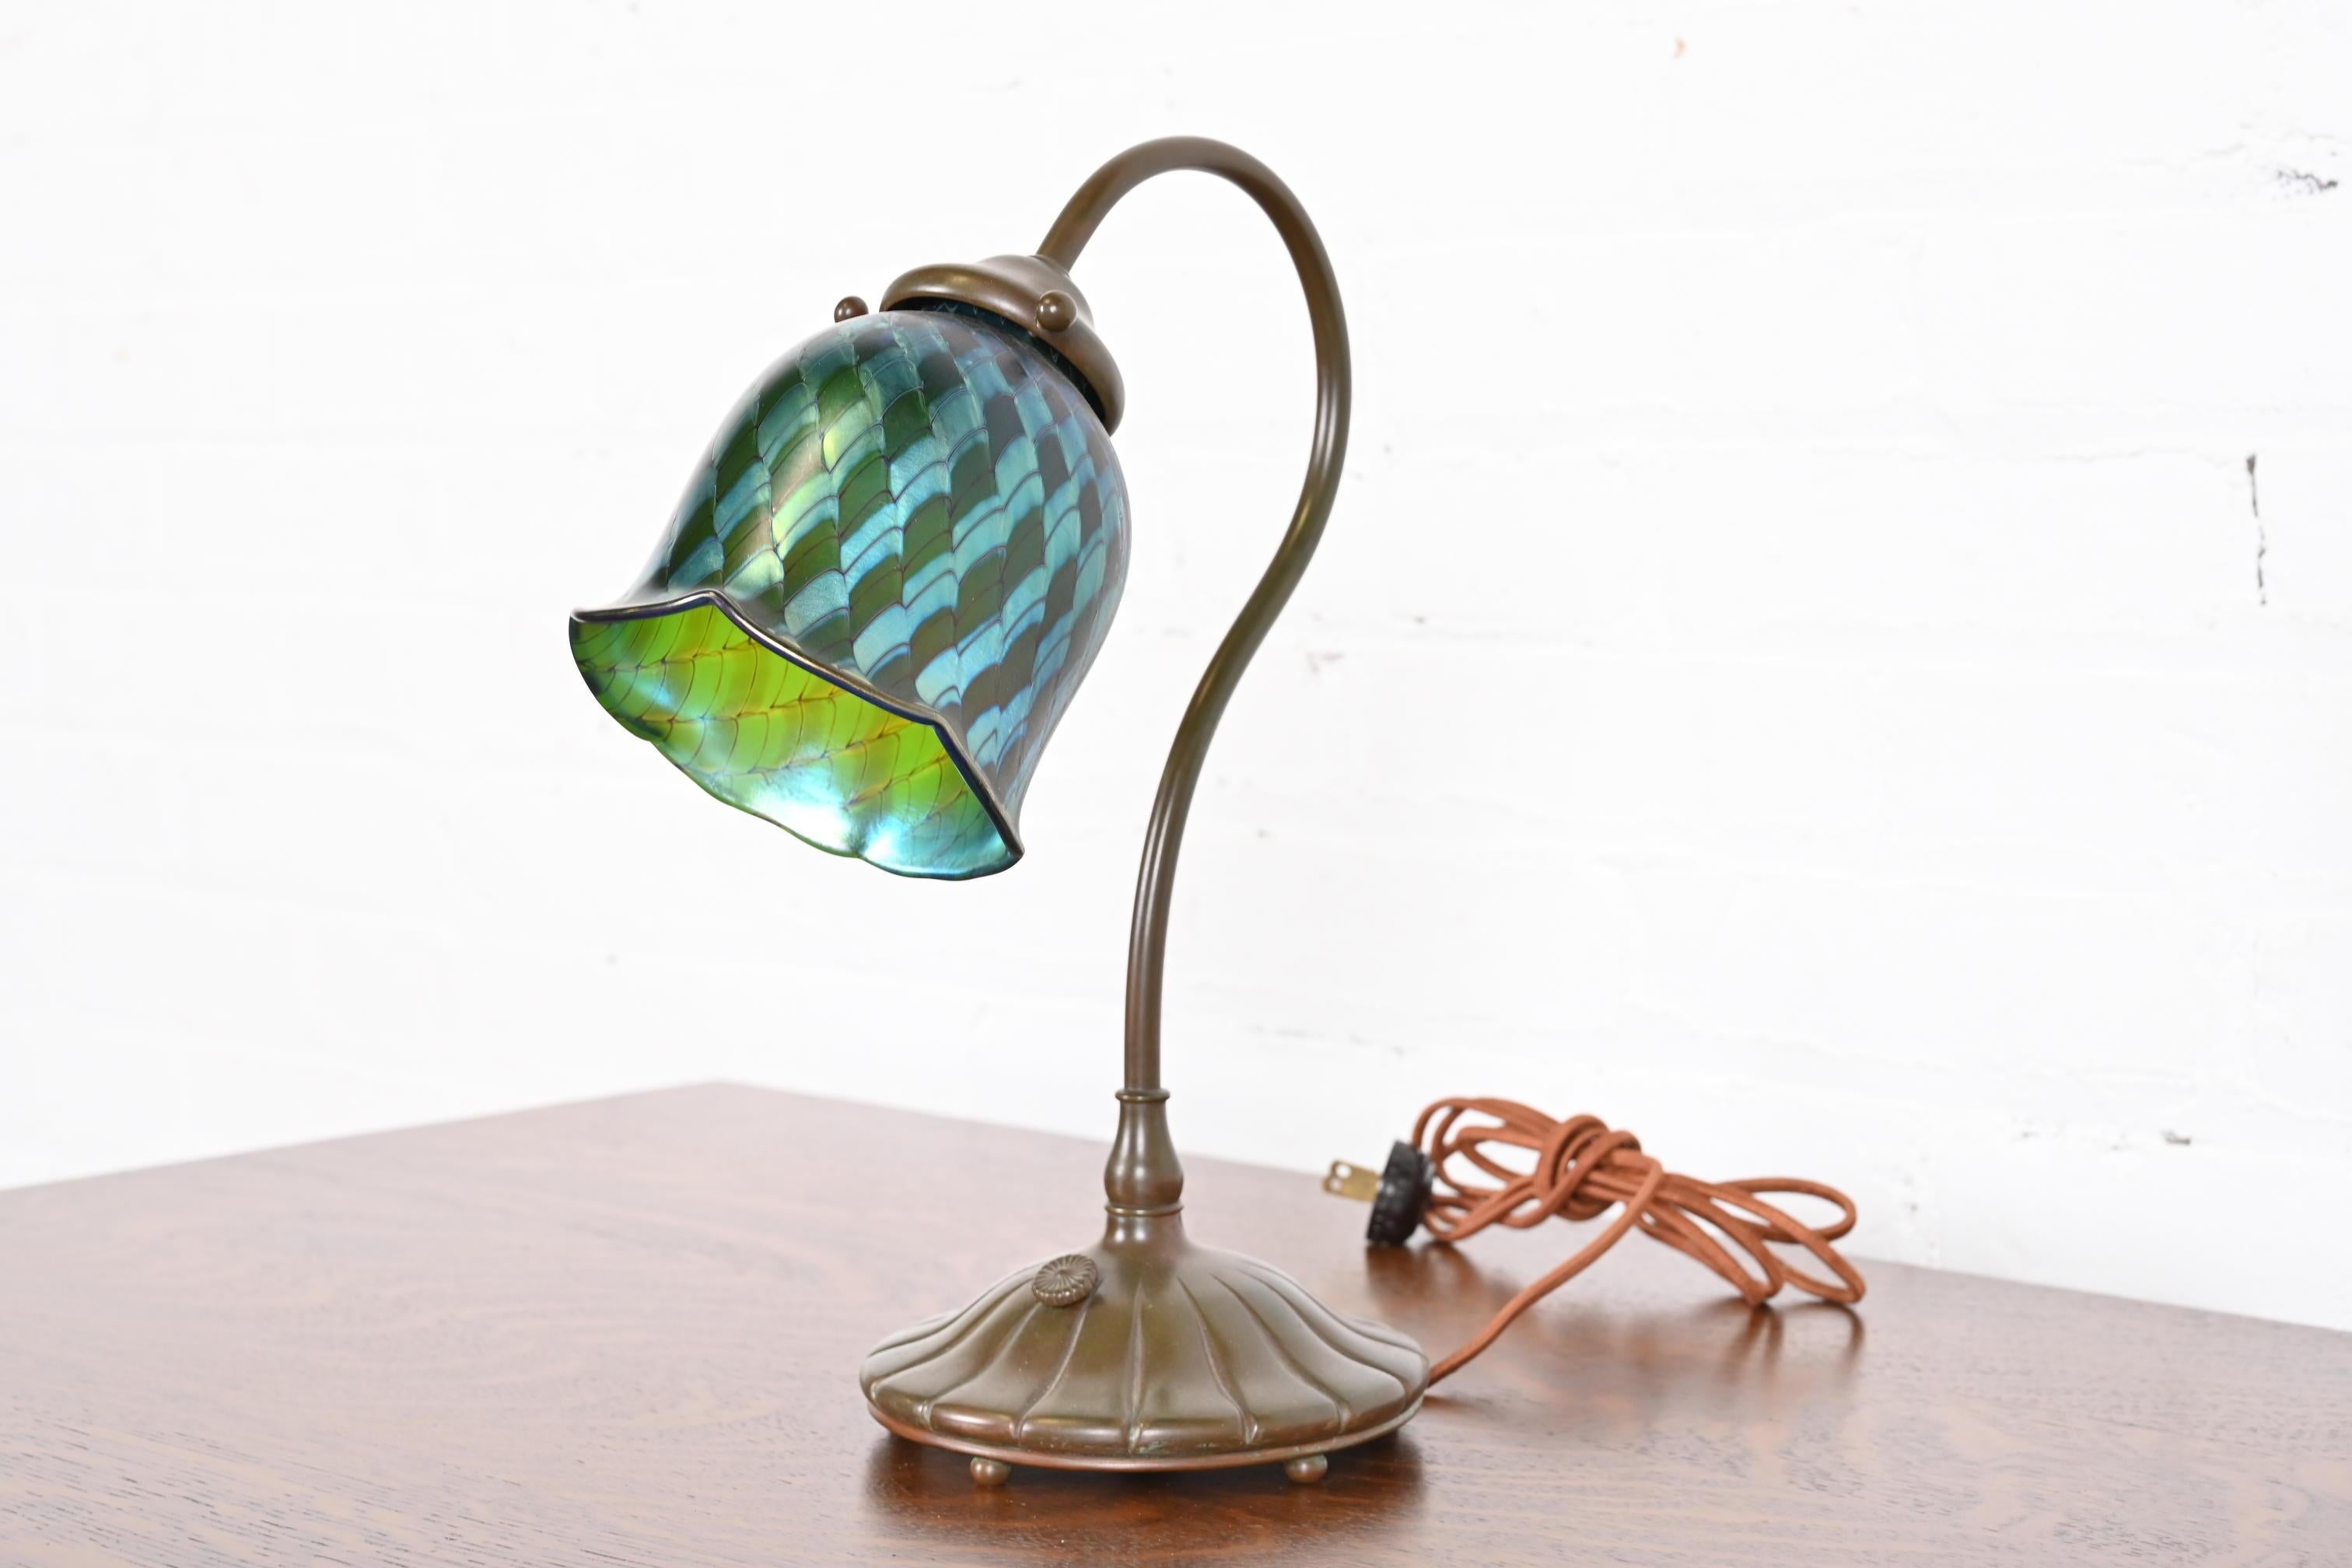 An outstanding Arts & Crafts or Art Deco period desk lamp

In the manner of Tiffany Studios

By Buffalo Studios of Pasadena, CA

USA, Circa 1910

Bronze, with beautiful green and blue iridescent favrile glass shade.

Measures: 10